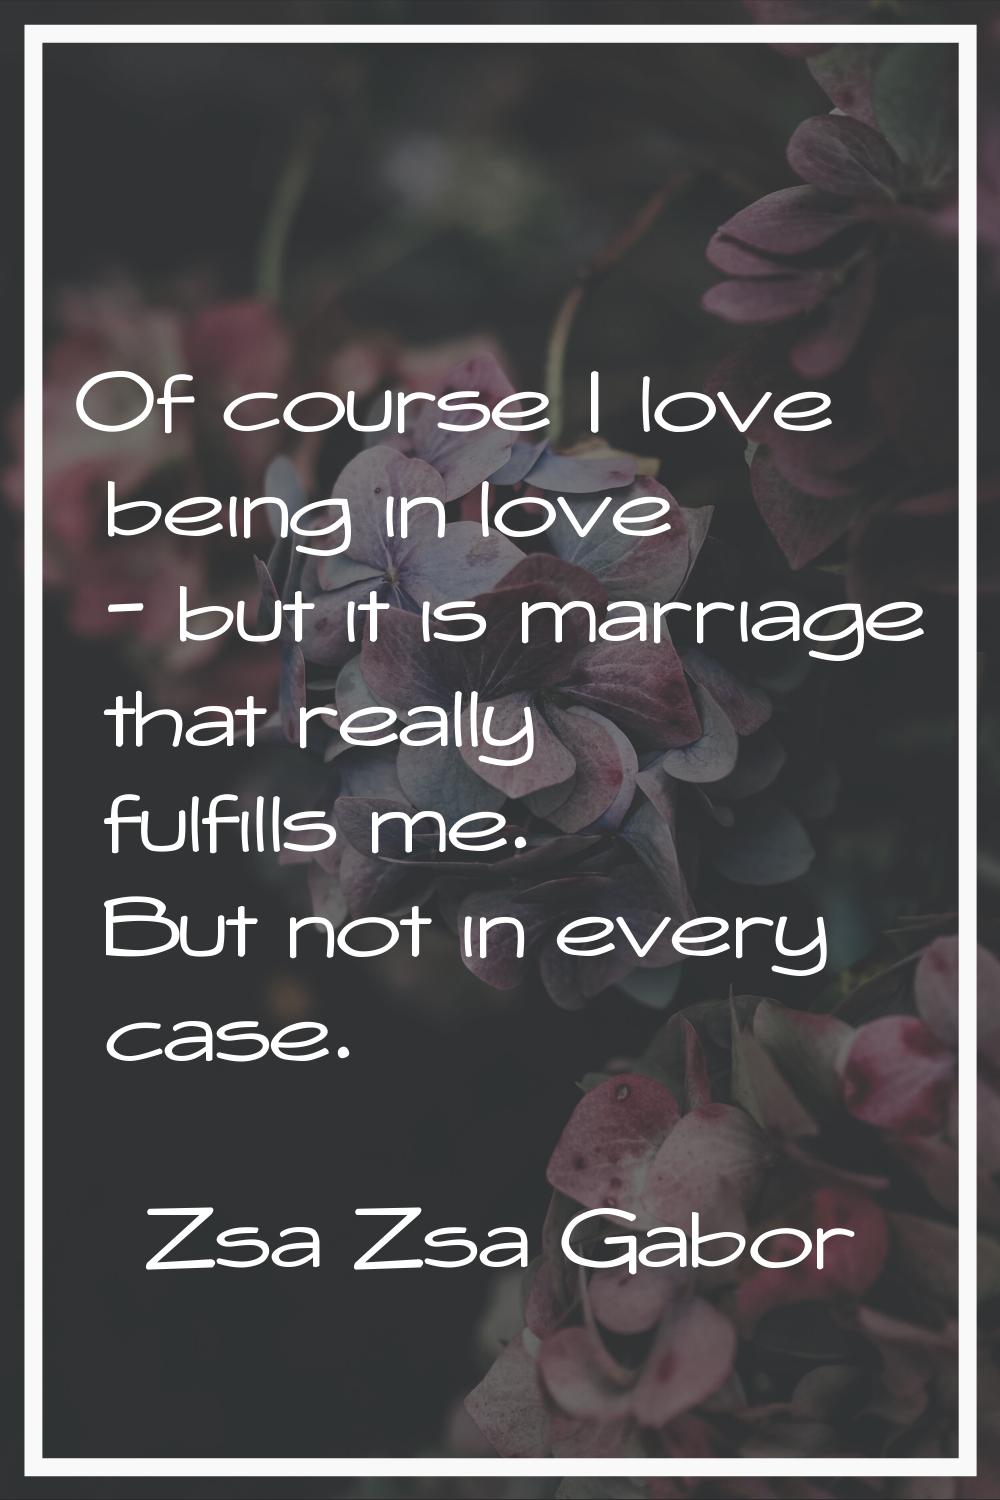 Of course I love being in love - but it is marriage that really fulfills me. But not in every case.